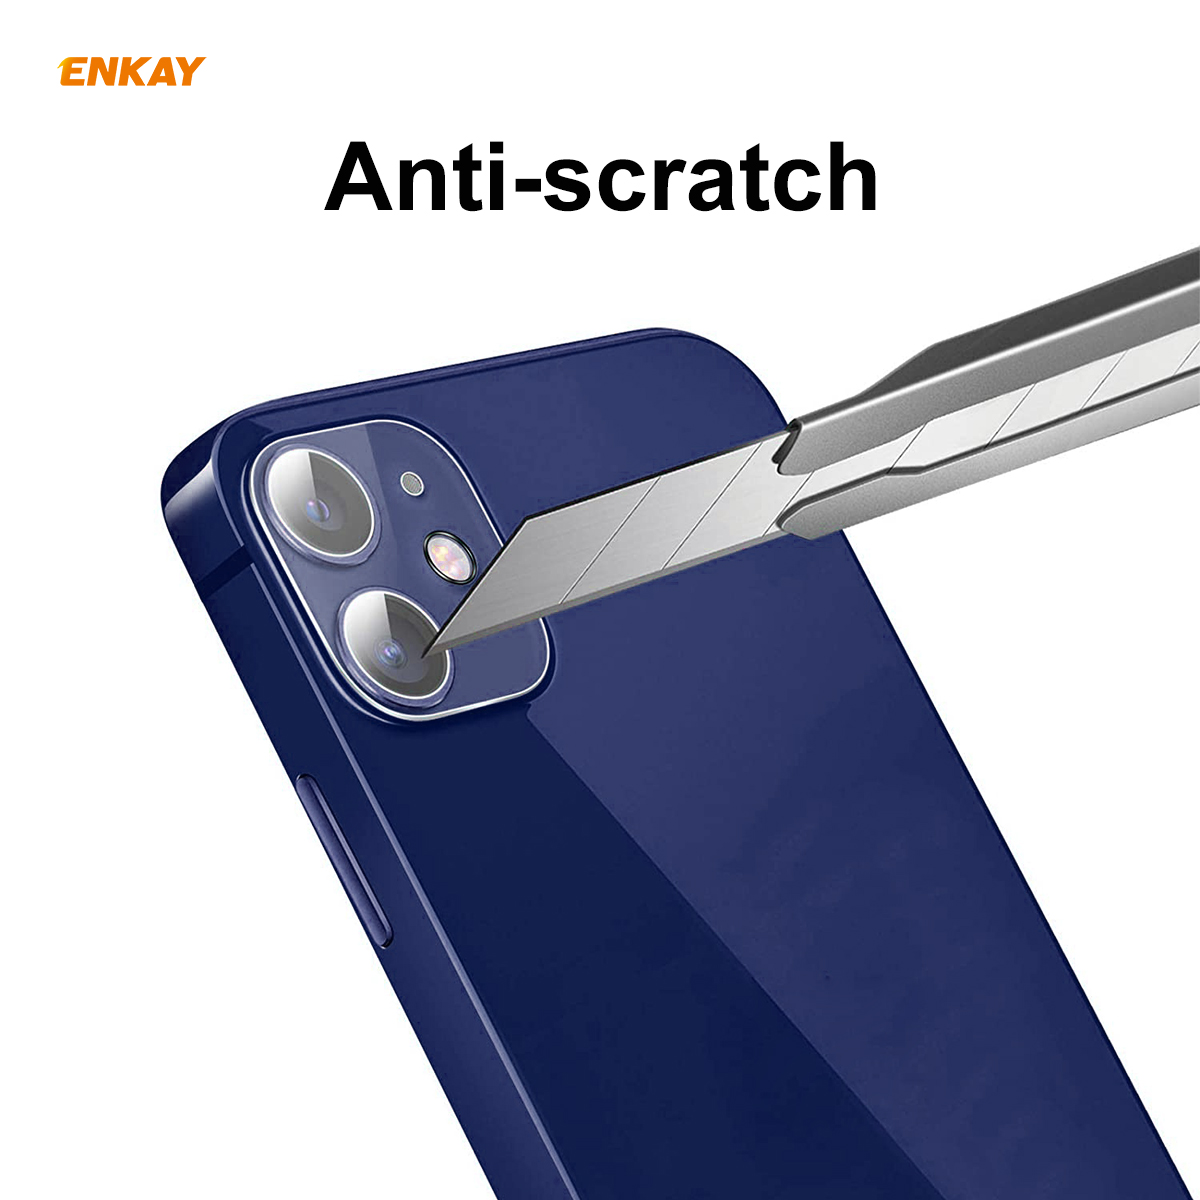 ENKAY-for-iPhone-12-3D-Anti-Scratch-Ultra-Thin-HD-Clear-Soft-Tempered-Glass-Phone-Camera-Lens-Protec-1784342-2